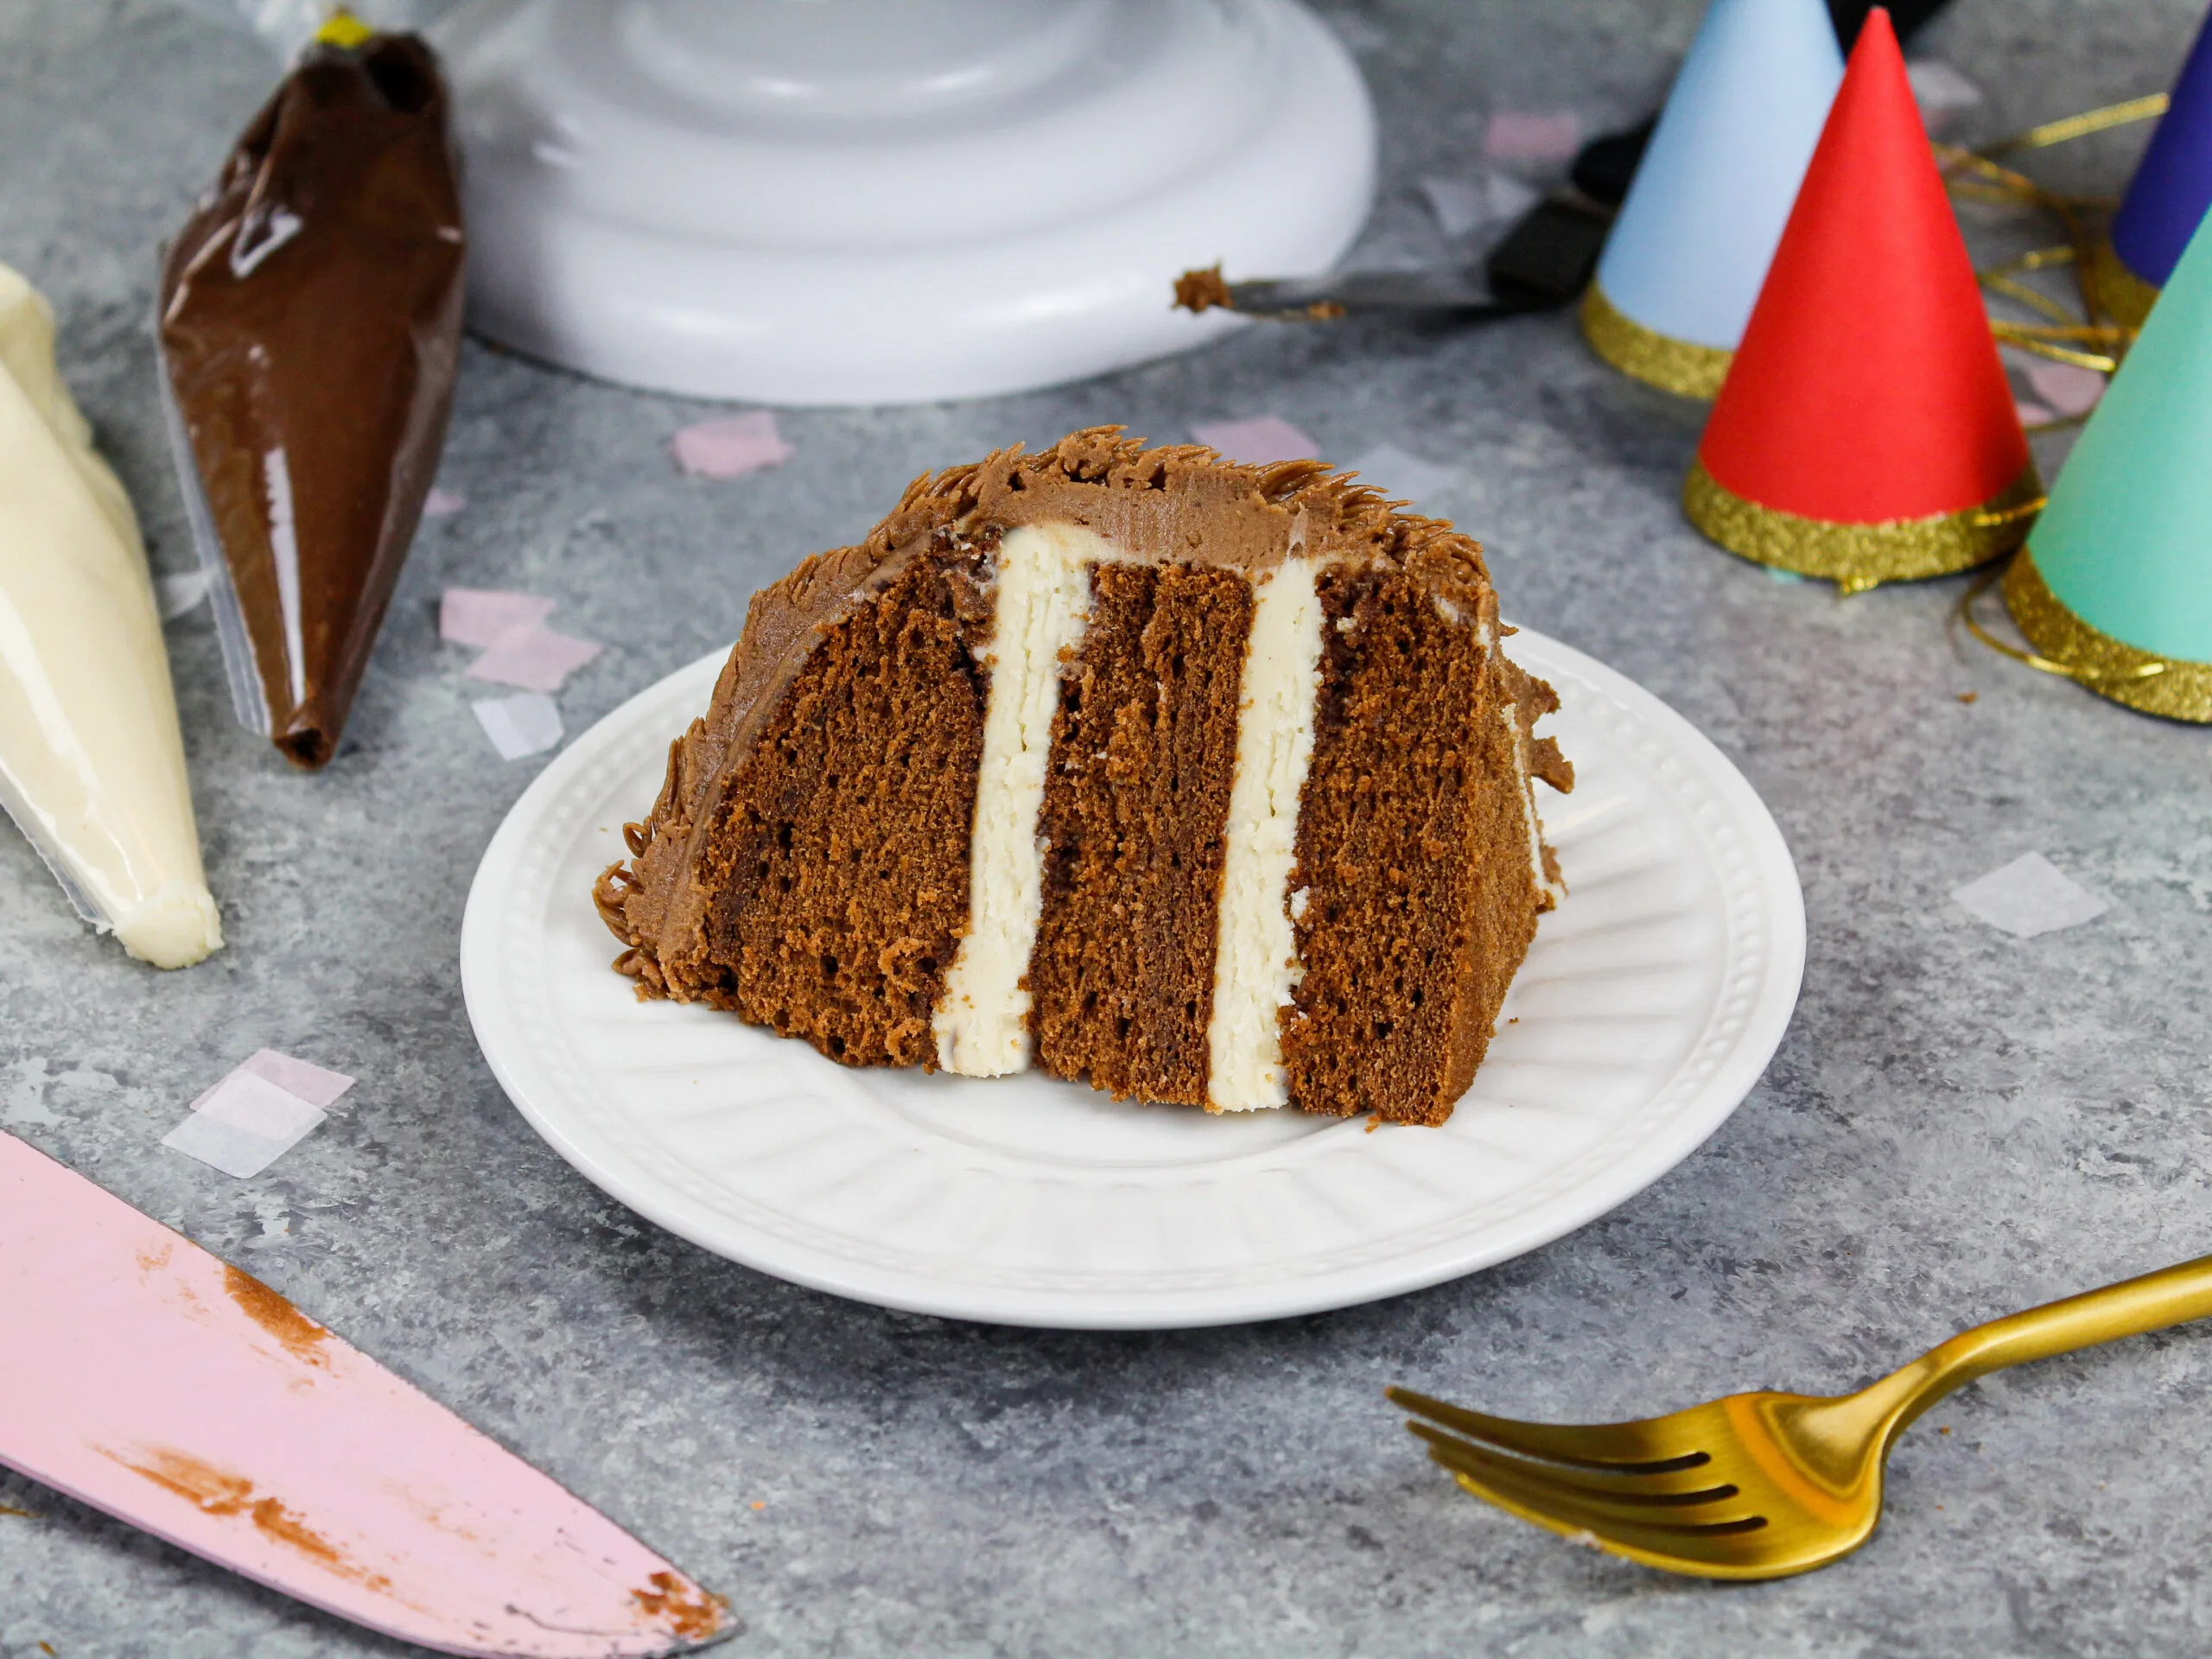 image of a slice of chocolate cake filled with peanut butter buttercream that's been cut from a sloth cake